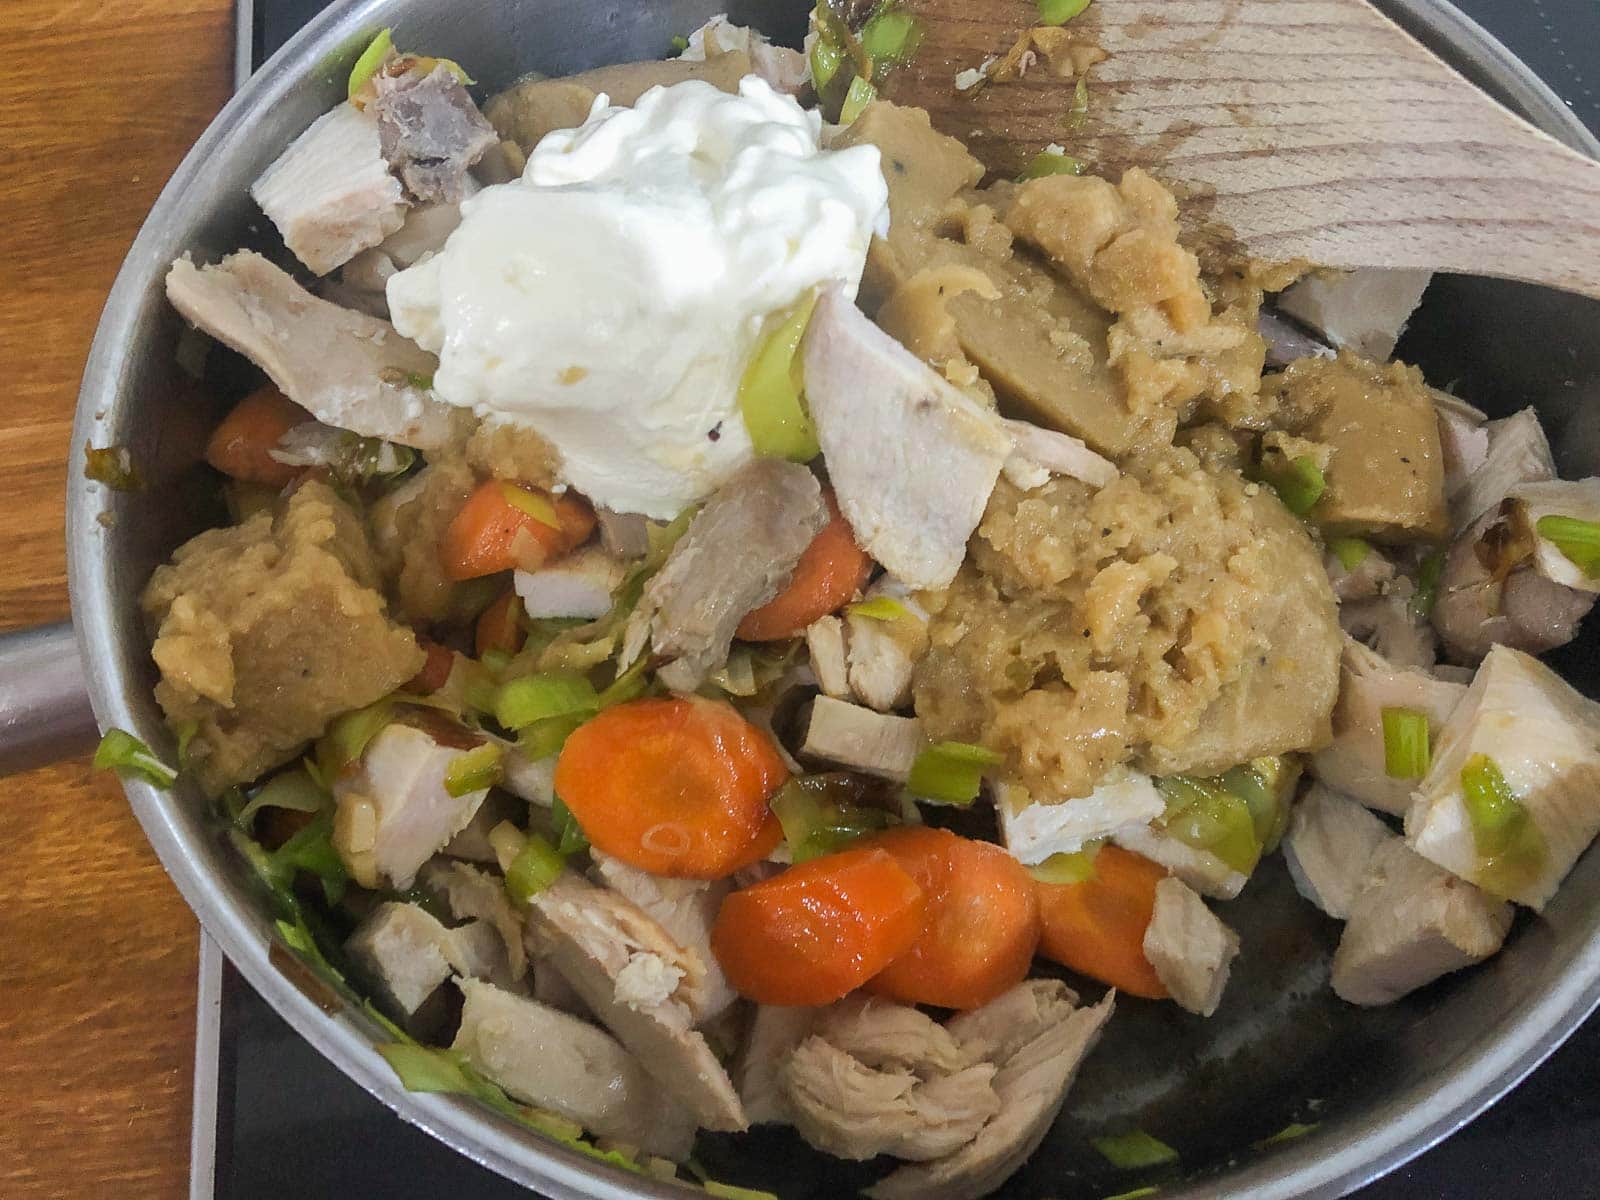 Leftover turkey, vegetables and gravy warmed with creme fraiche for a pie filing.